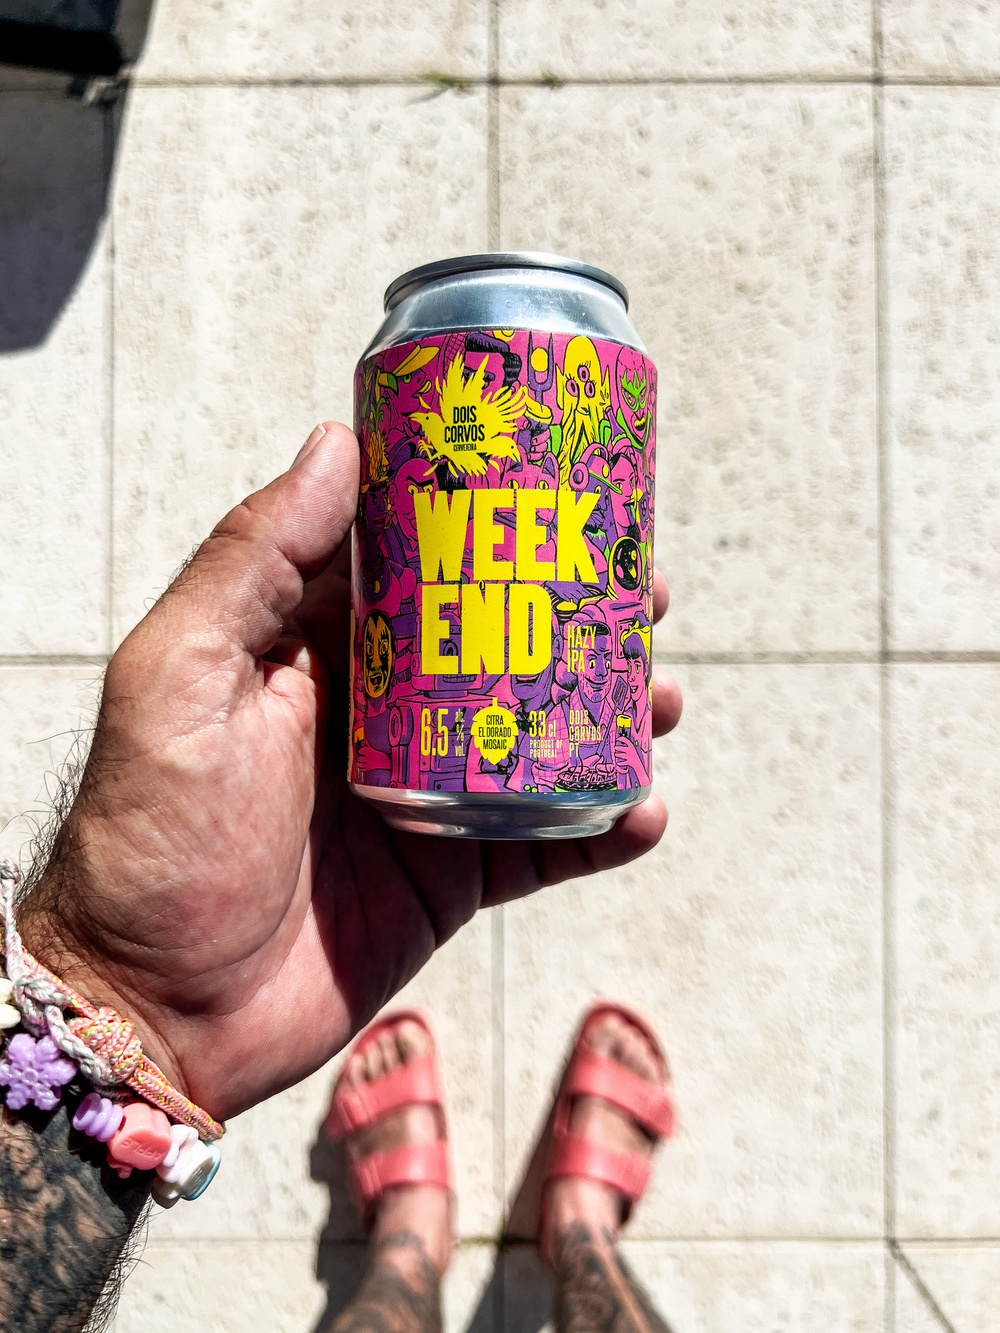 A can of “Weekend Hazy IPA” from Dois Corvos Brewery is held by a person with visible tattoos and wearing a multicolored bracelet. The can features colorful, artistic graphics with a yellow logo and details about the beer.